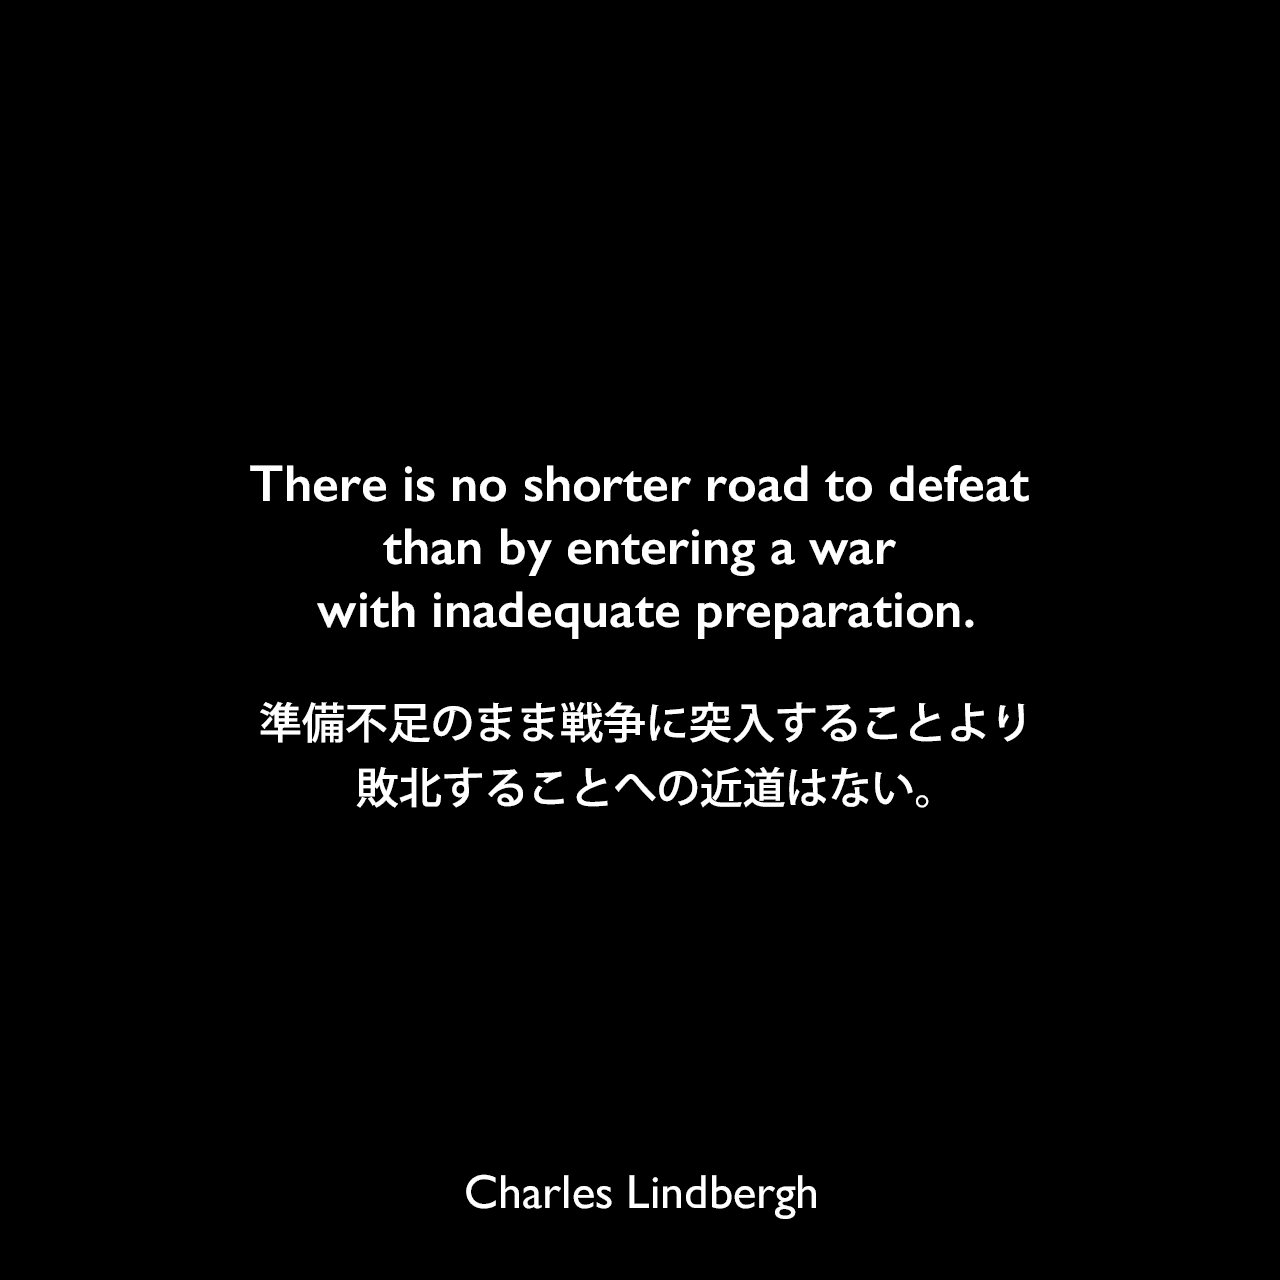 There is no shorter road to defeat than by entering a war with inadequate preparation.準備不足のまま戦争に突入することより敗北することへの近道はない。Charles Lindbergh